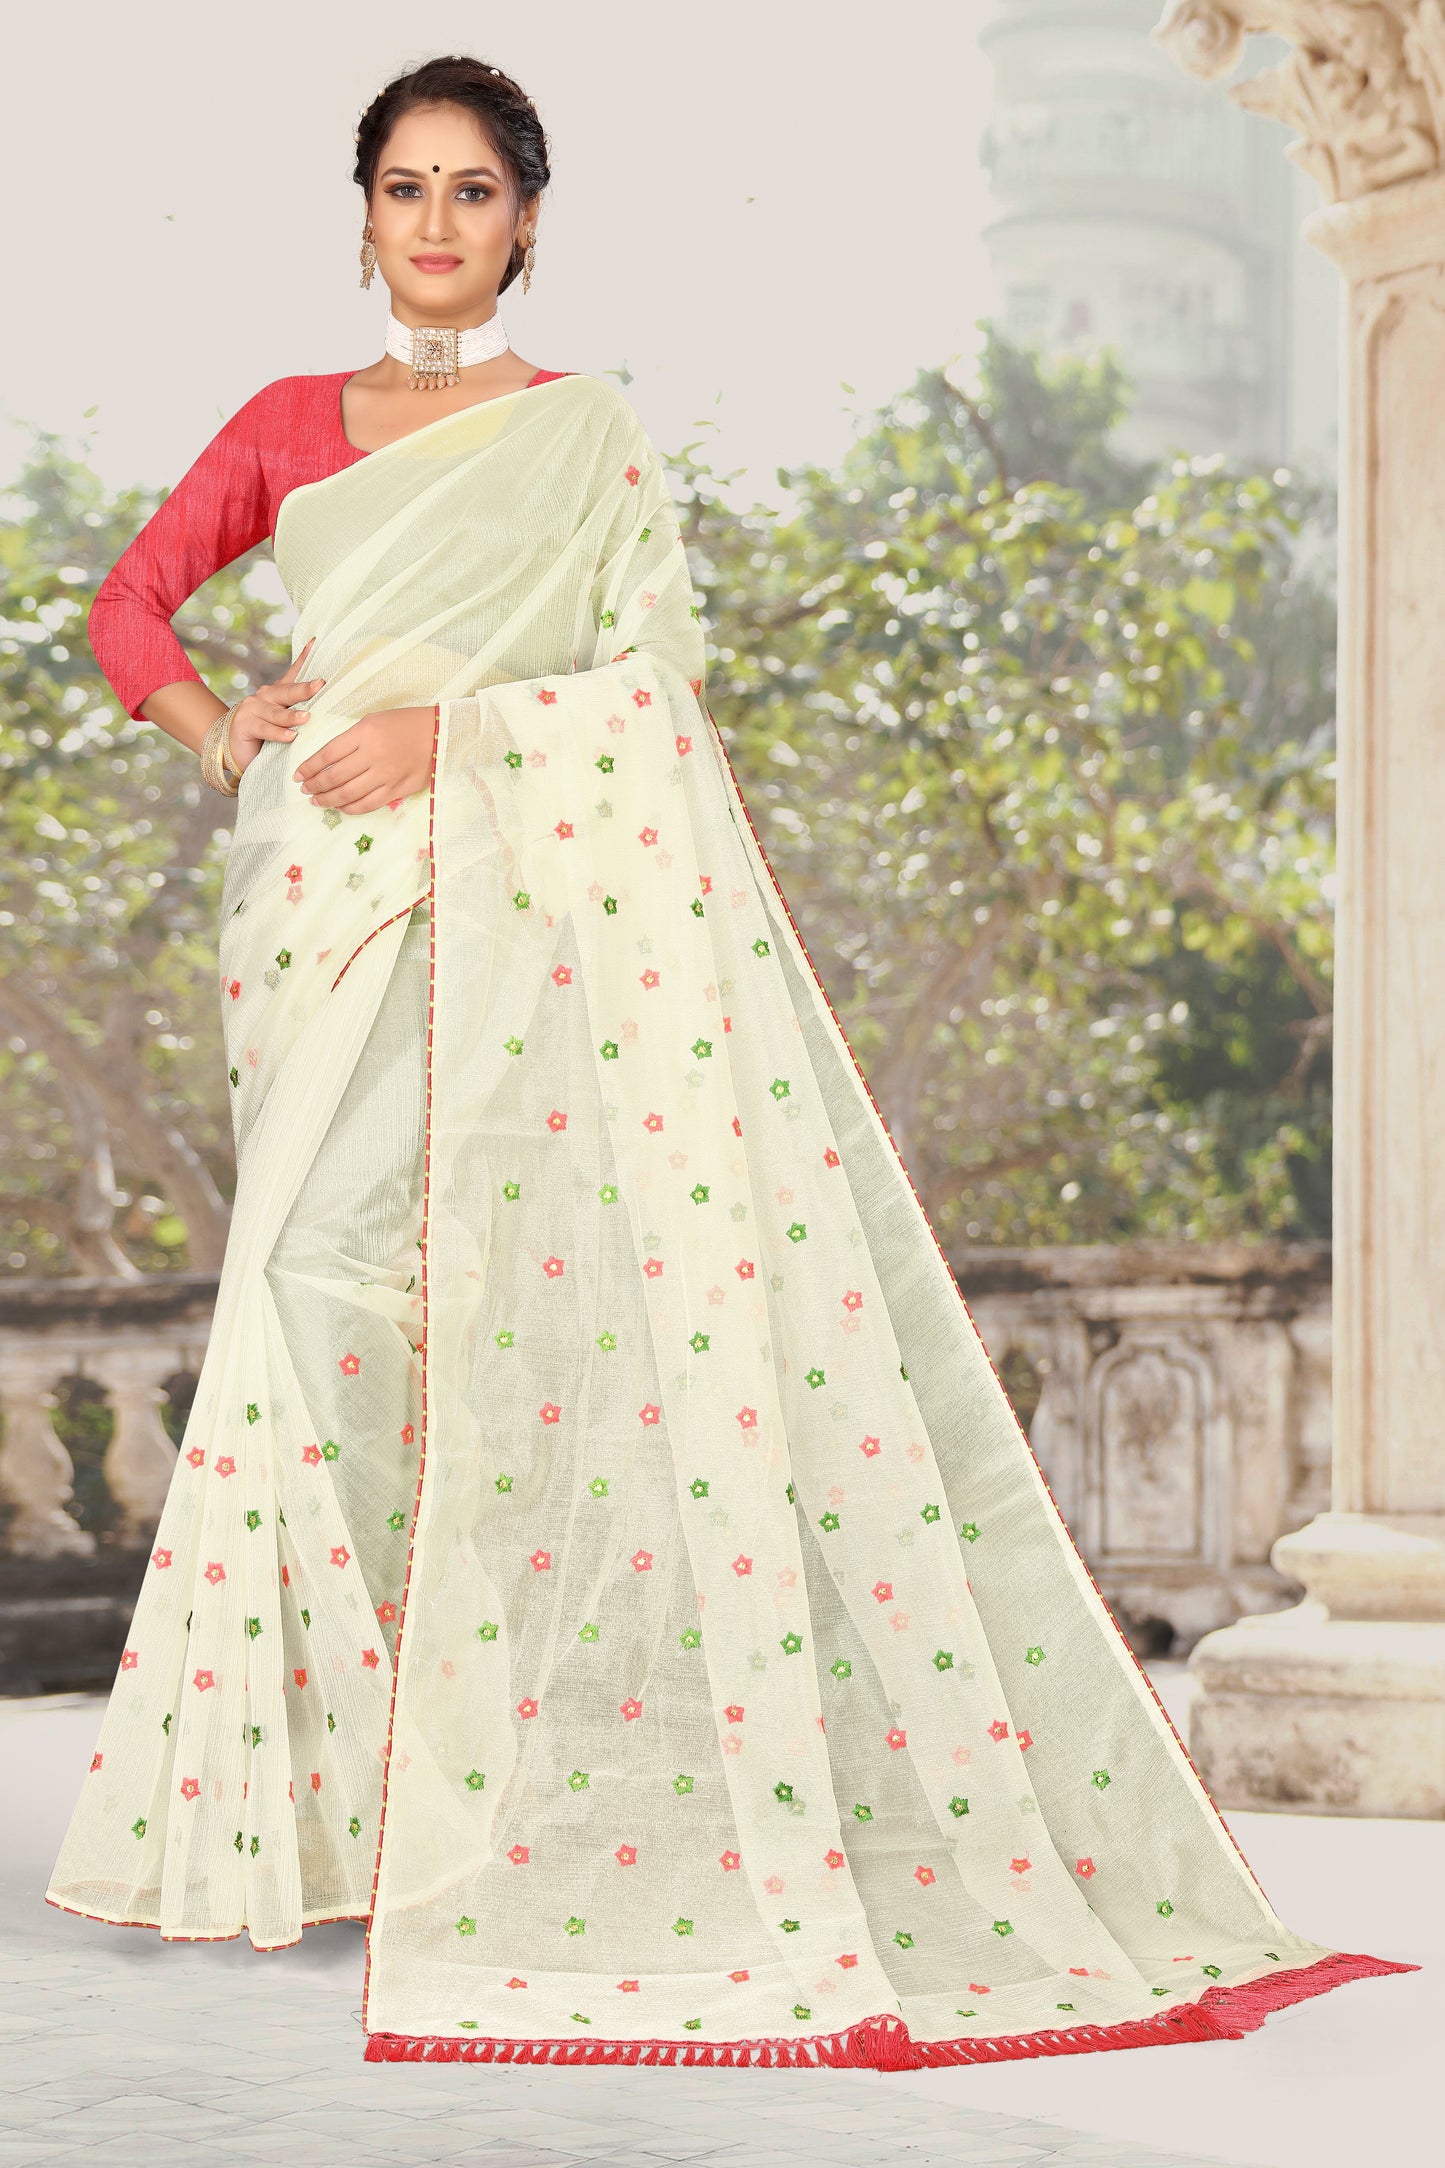 OFFICIAL ORGANZA COTTON WITH WORK IN WHOLE SAREE FOR ALL FORMAL OCCASIONS WITH GAAJARI BLOUSE